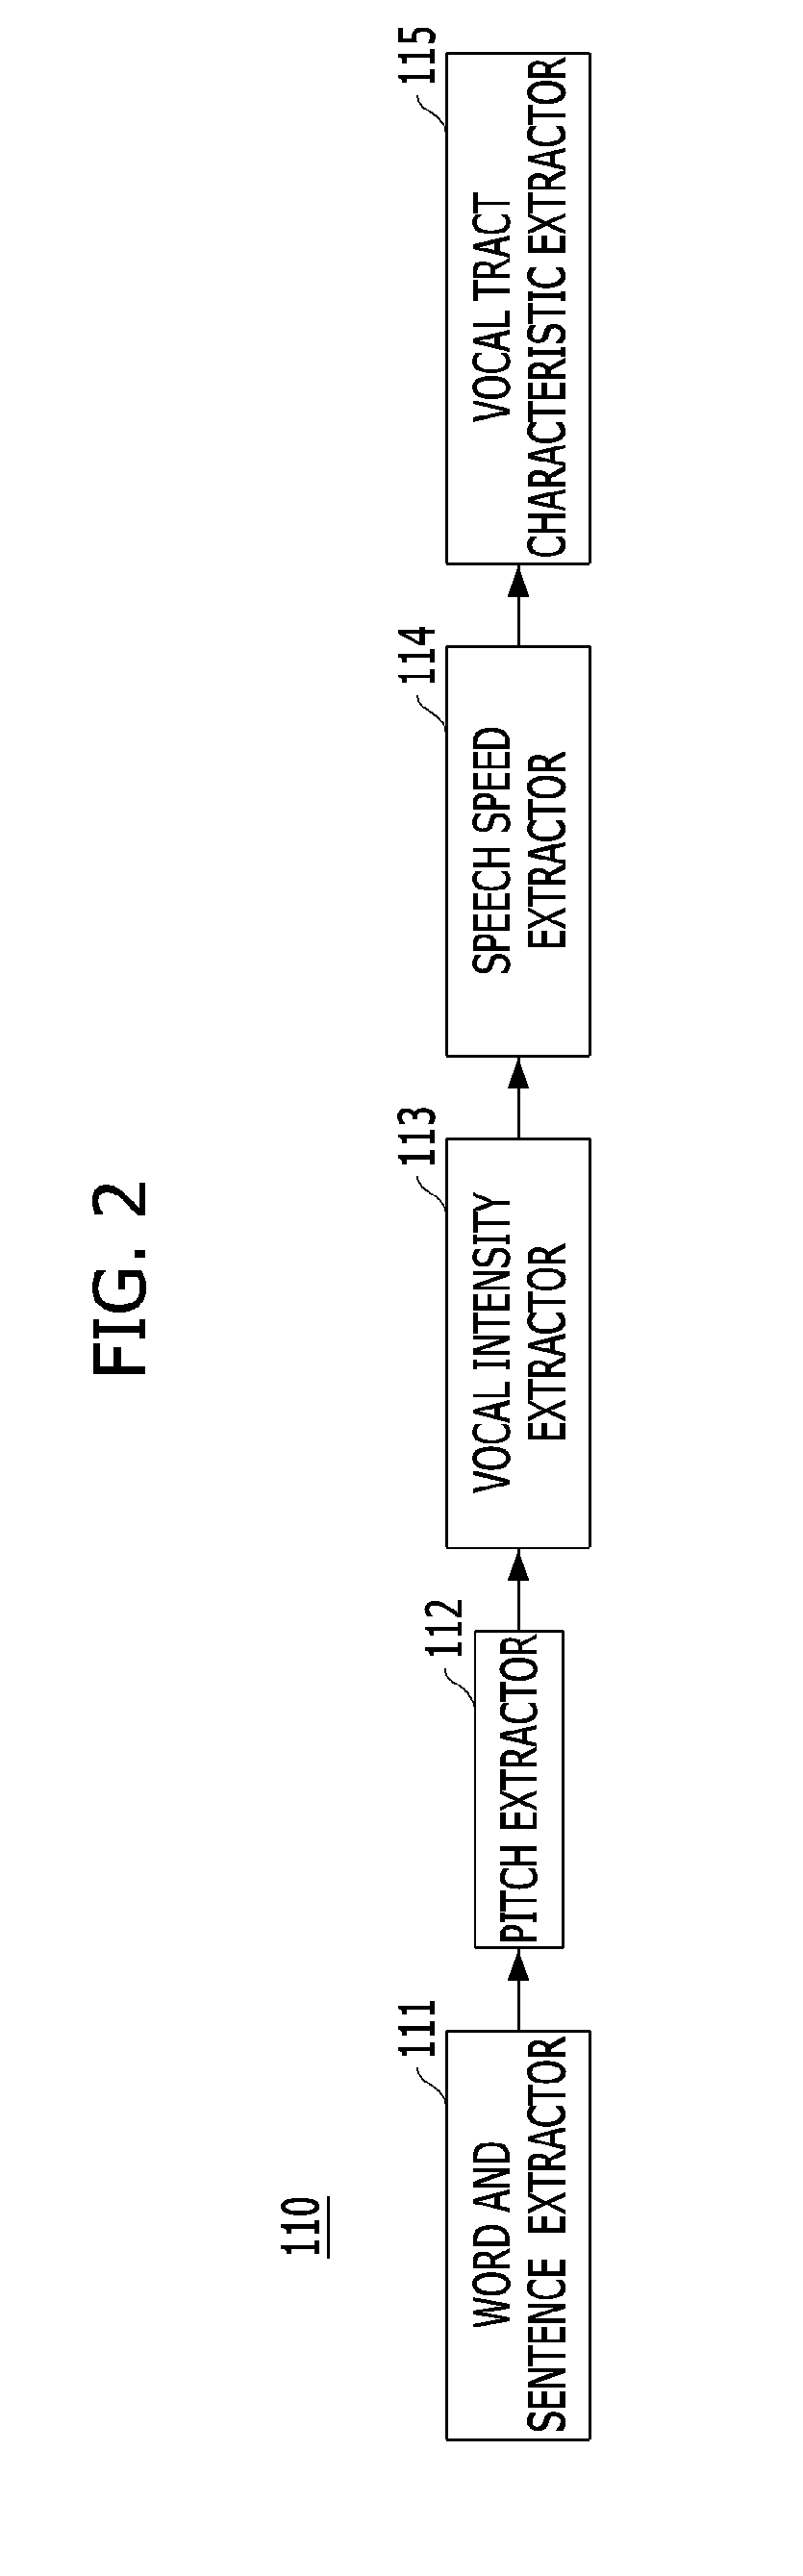 Automatic interpretation system and method for generating synthetic sound having characteristics similar to those of original speaker's voice